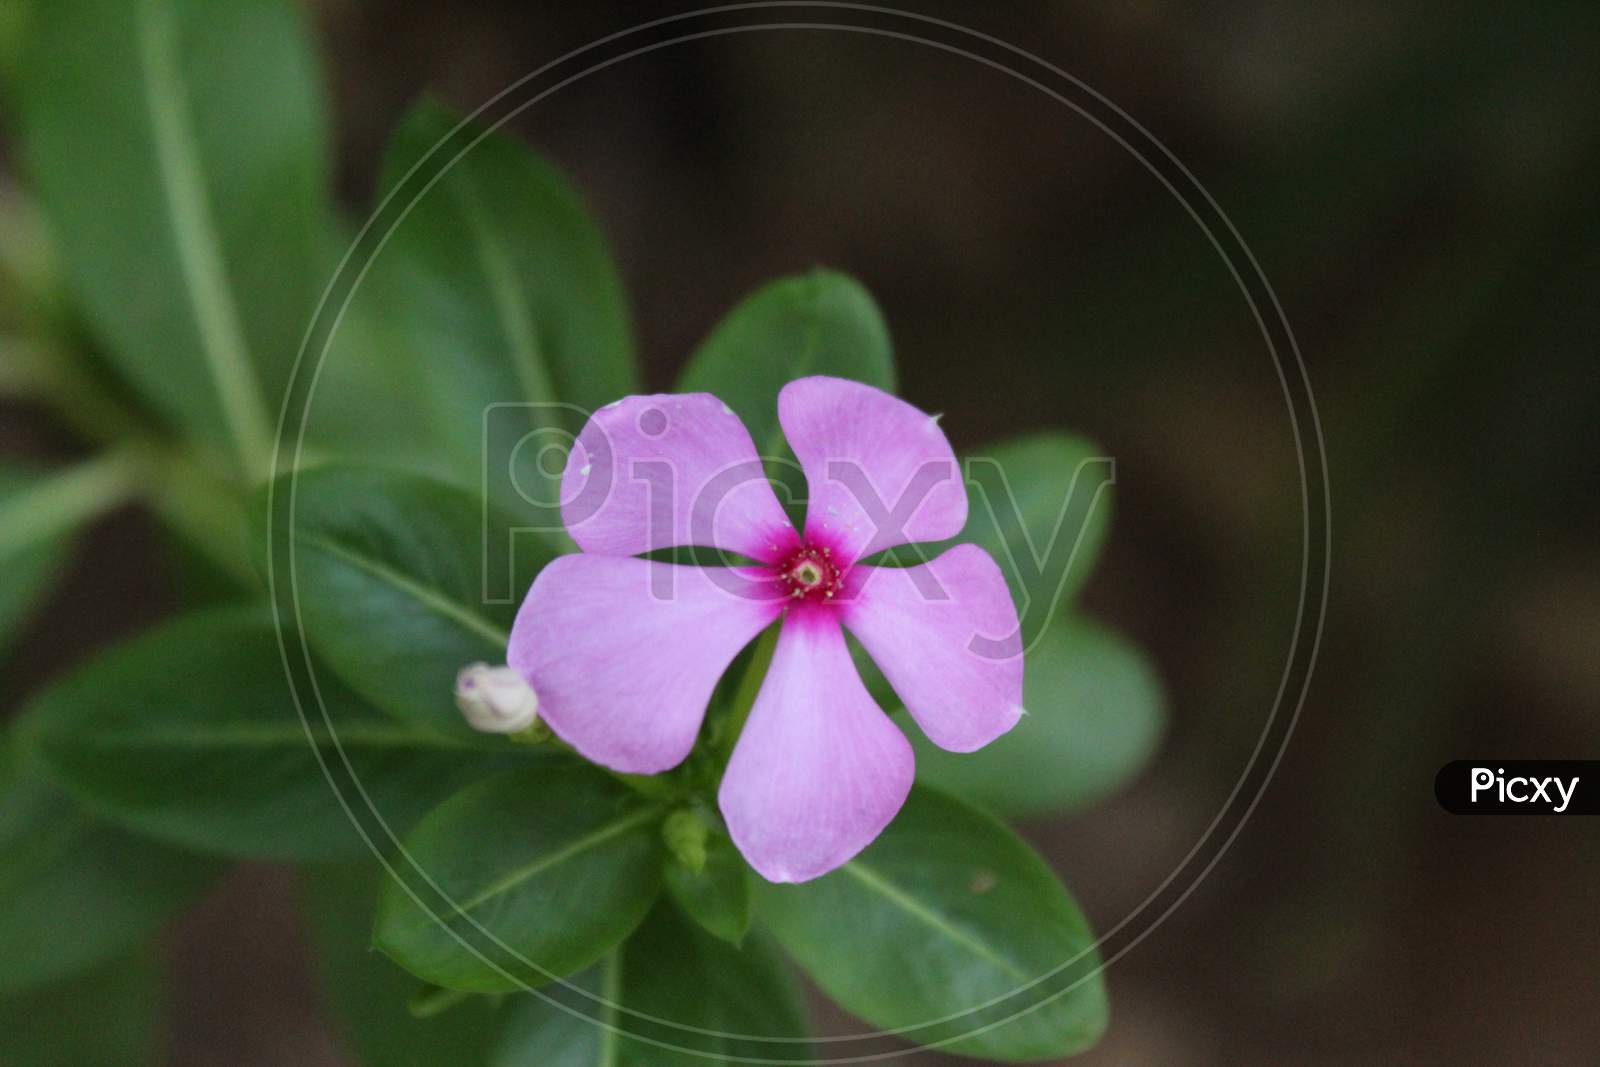 PINK FLOWERS WITH GREEN LEAFS